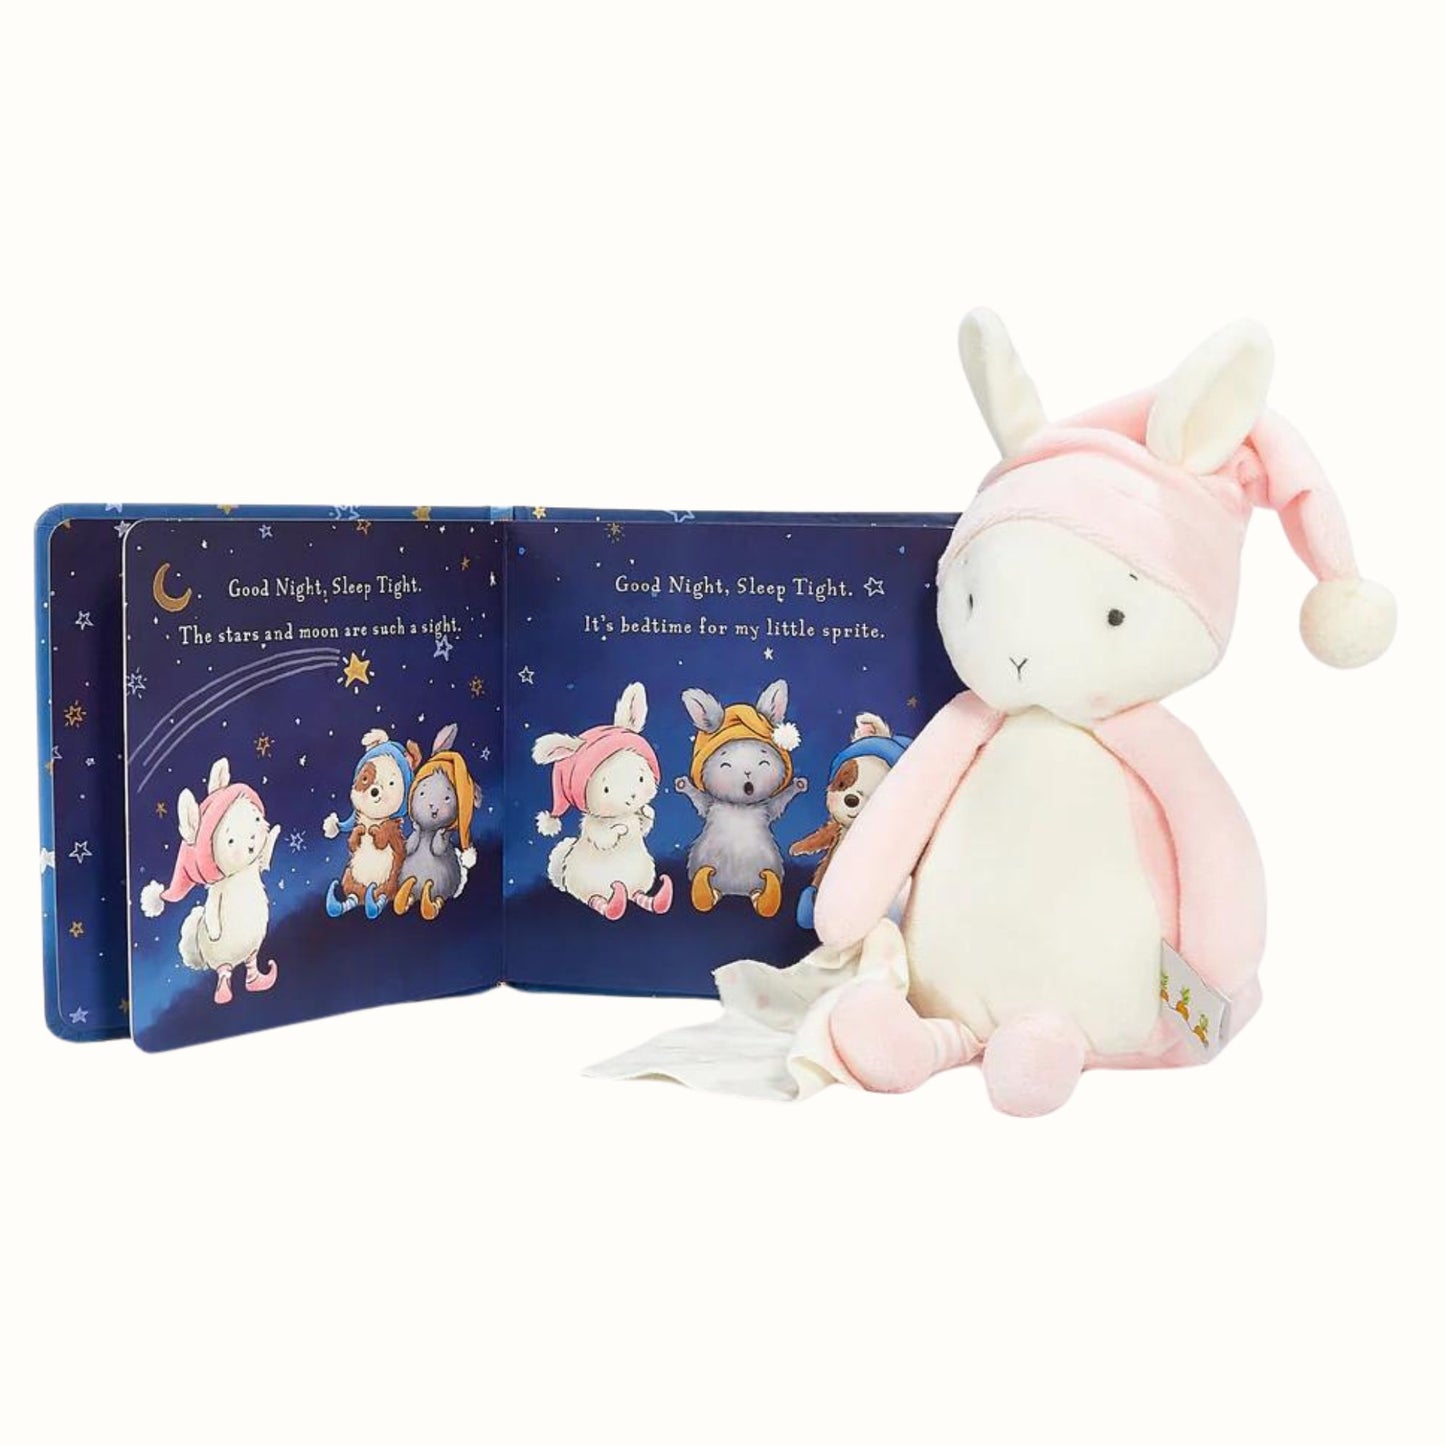 Hush Little Bunny Gift Set Bunnies by the Bay